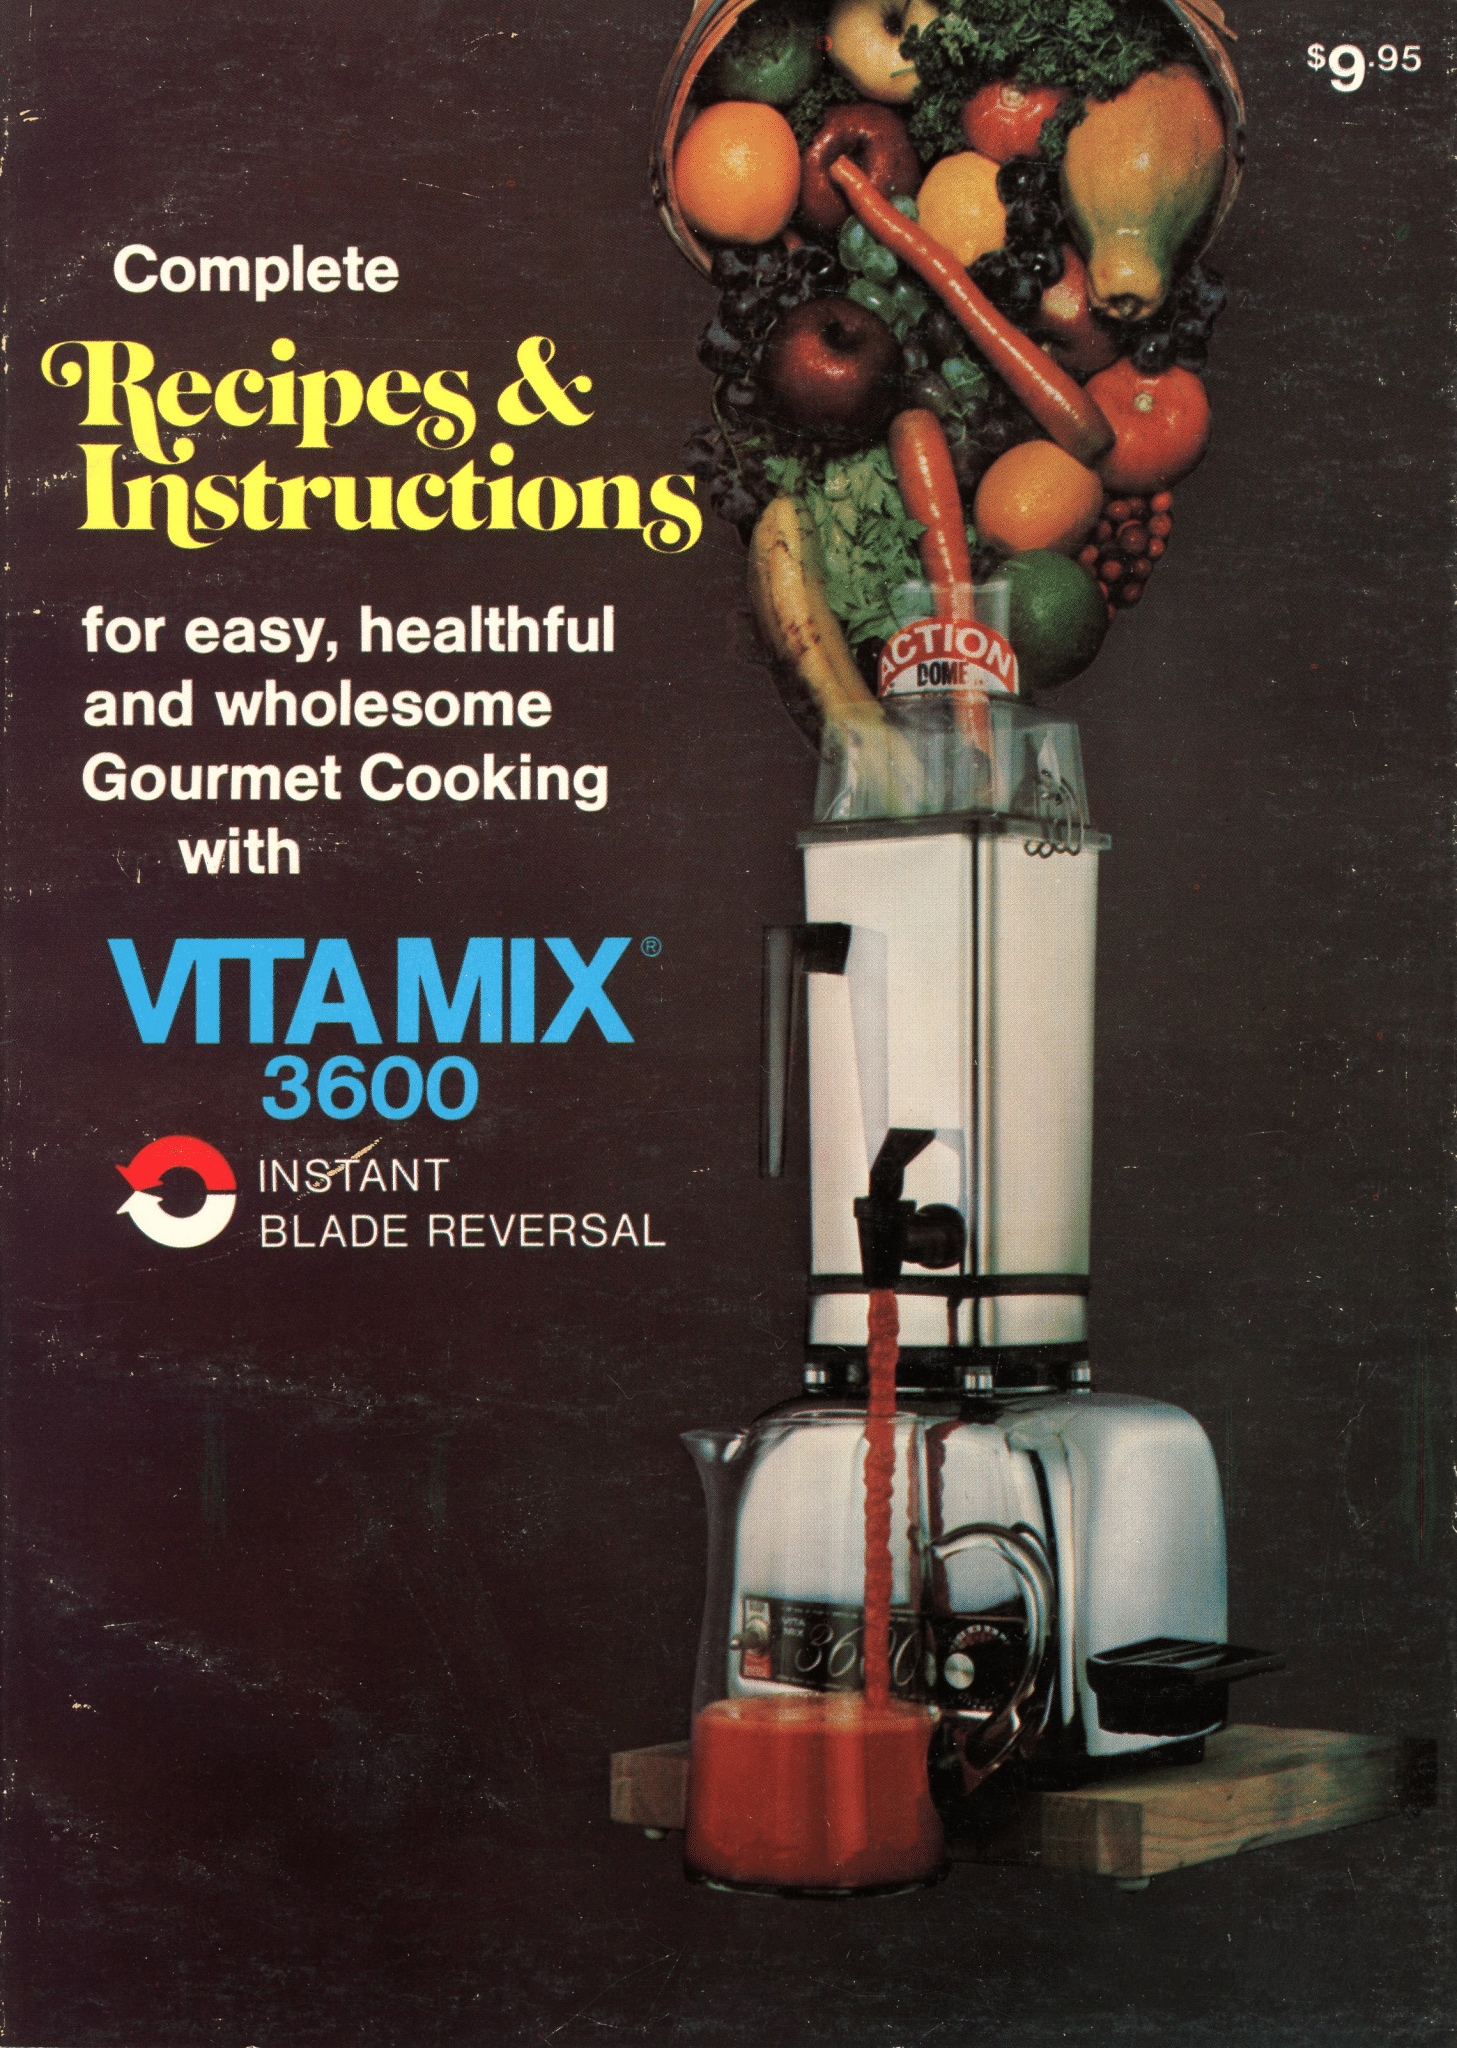 Recipes & Instructions for the Vitamix 3600 Model